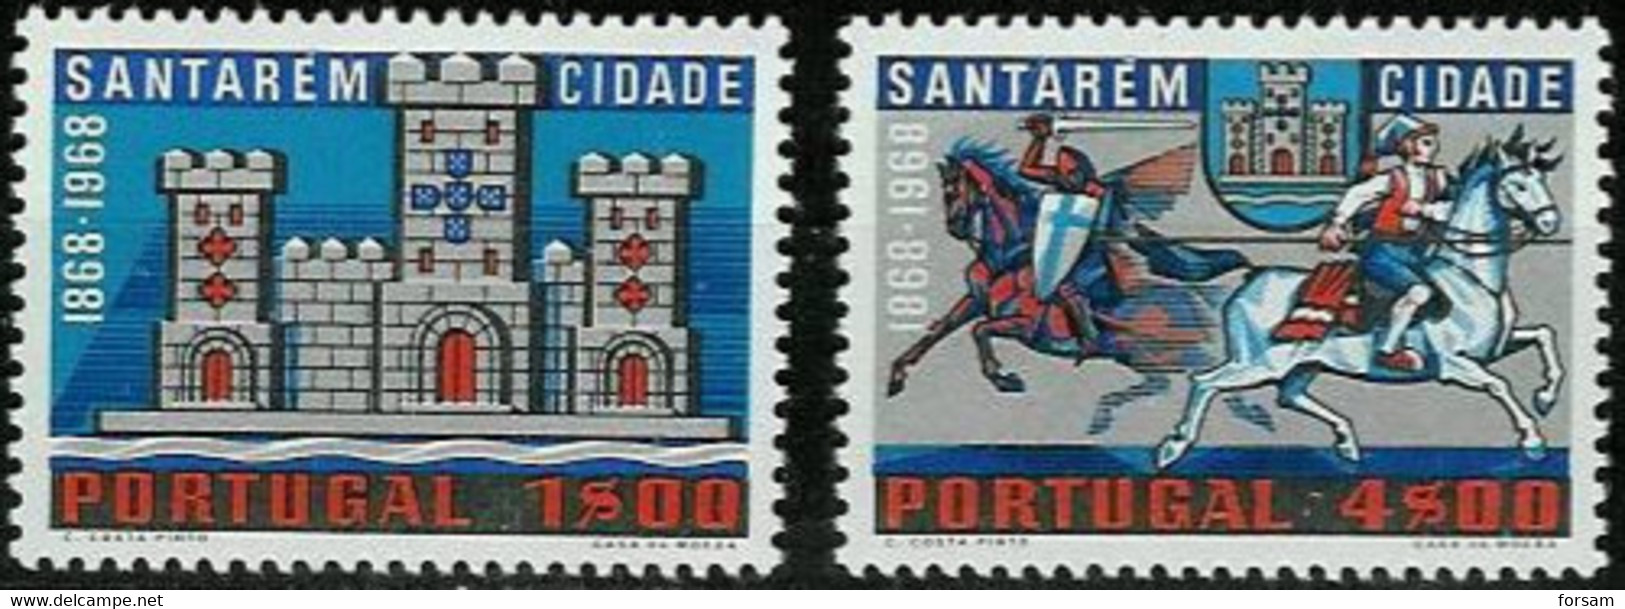 PORTUGAL..1970..Michel # 1109-1110...MNH. - Unused Stamps